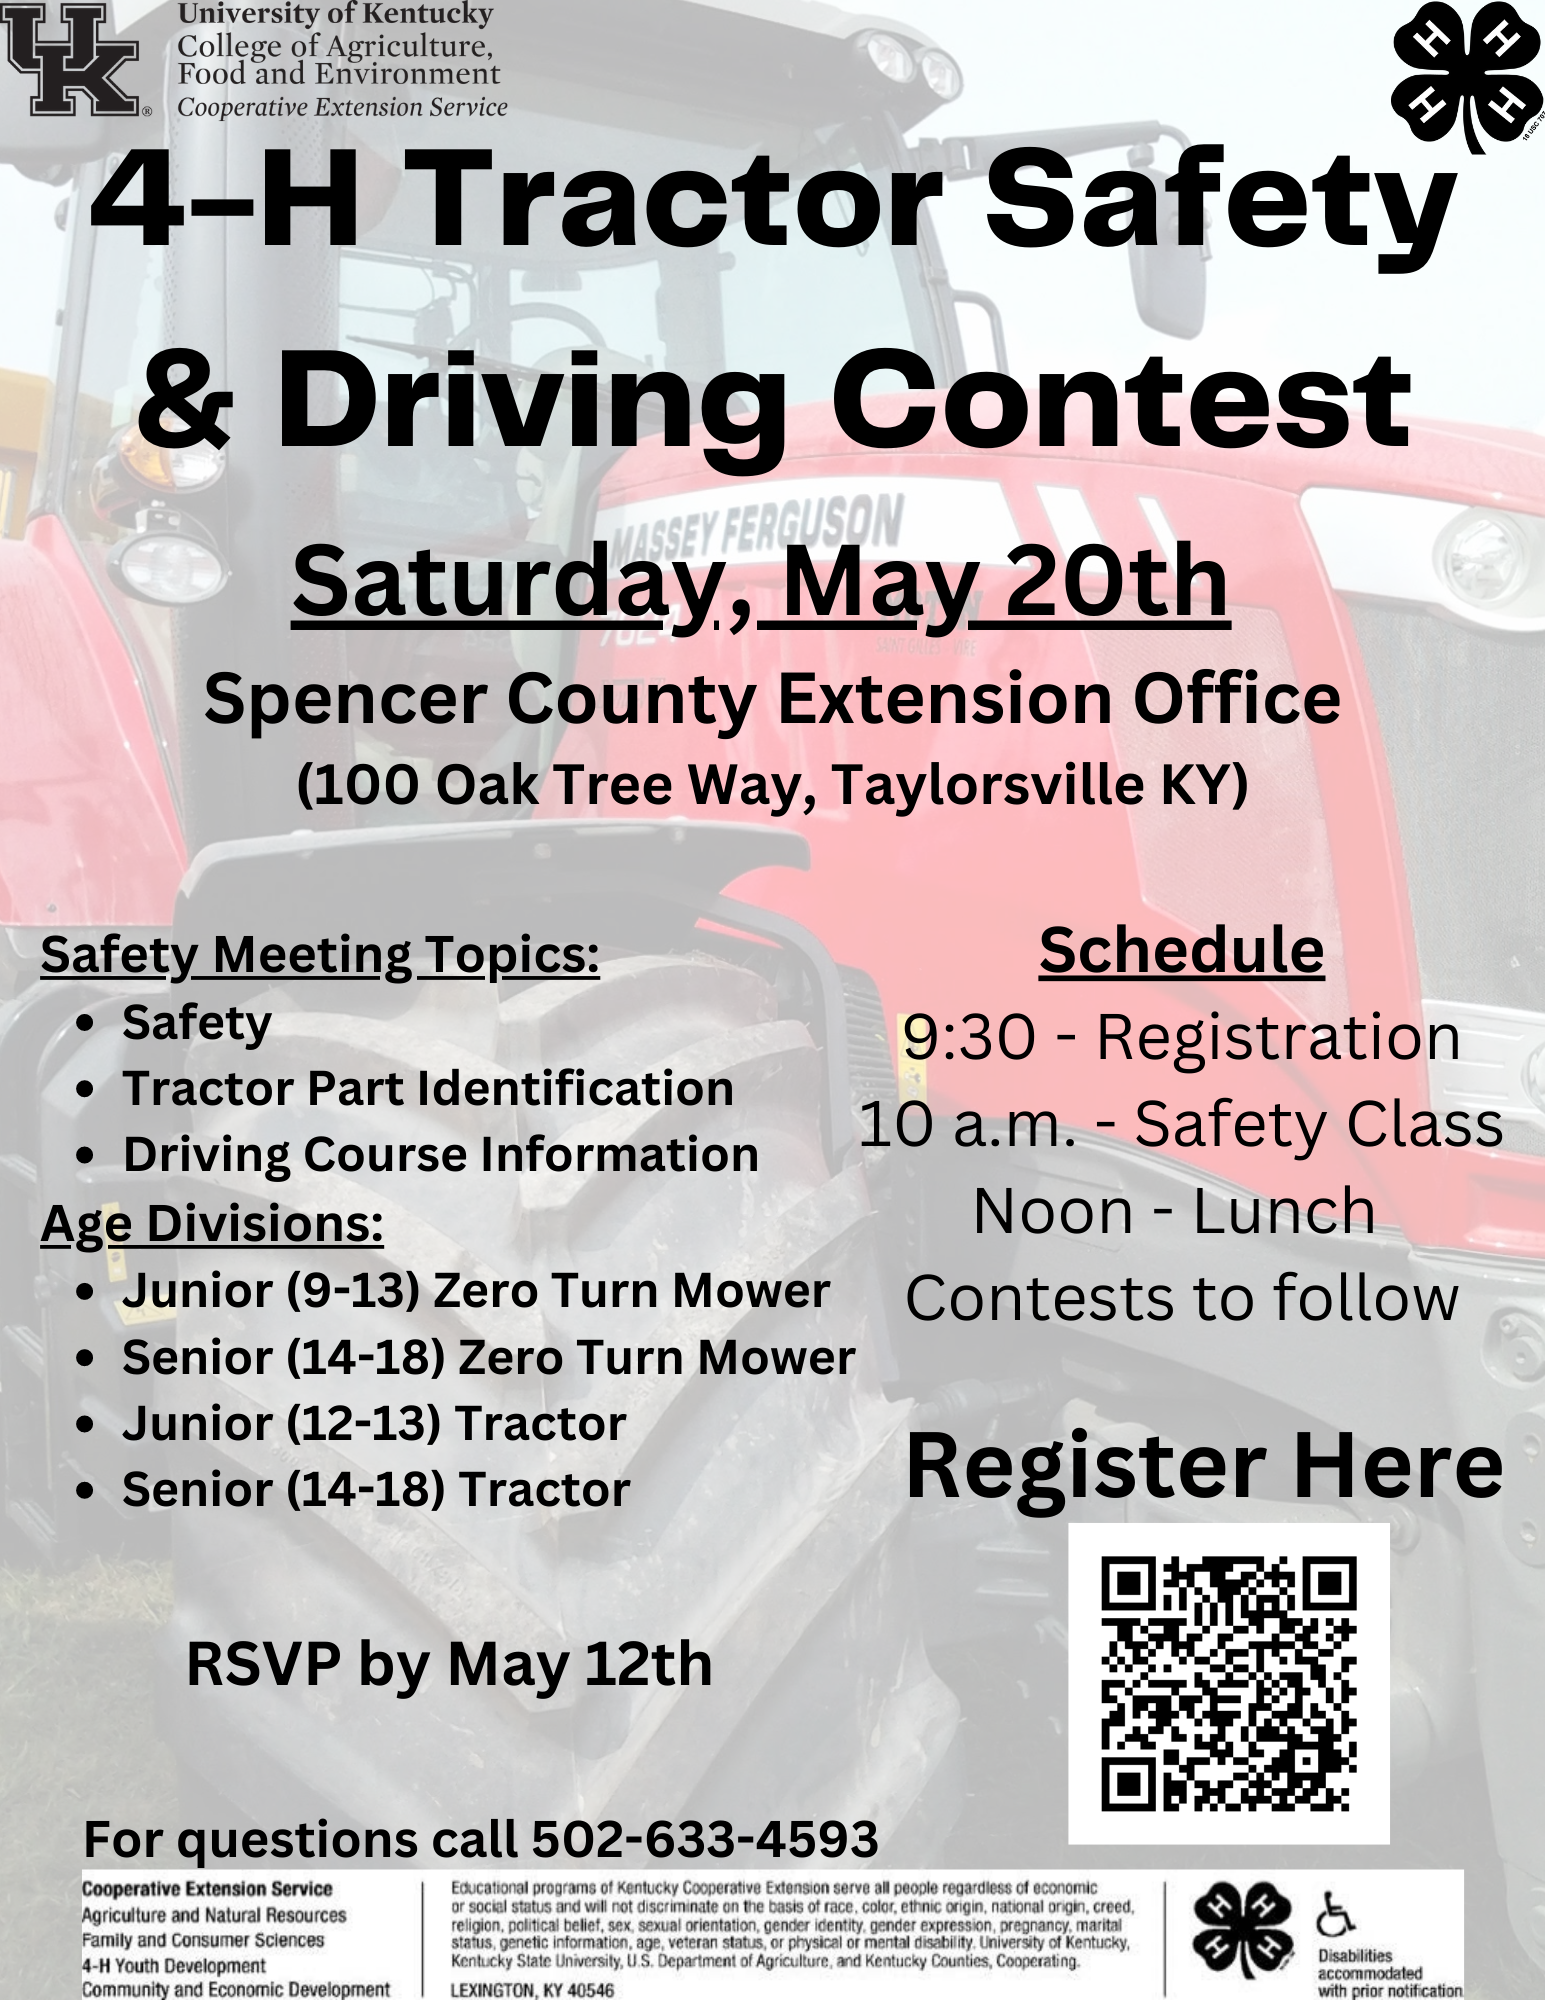 4-H Tractor Safety and Driving Contest